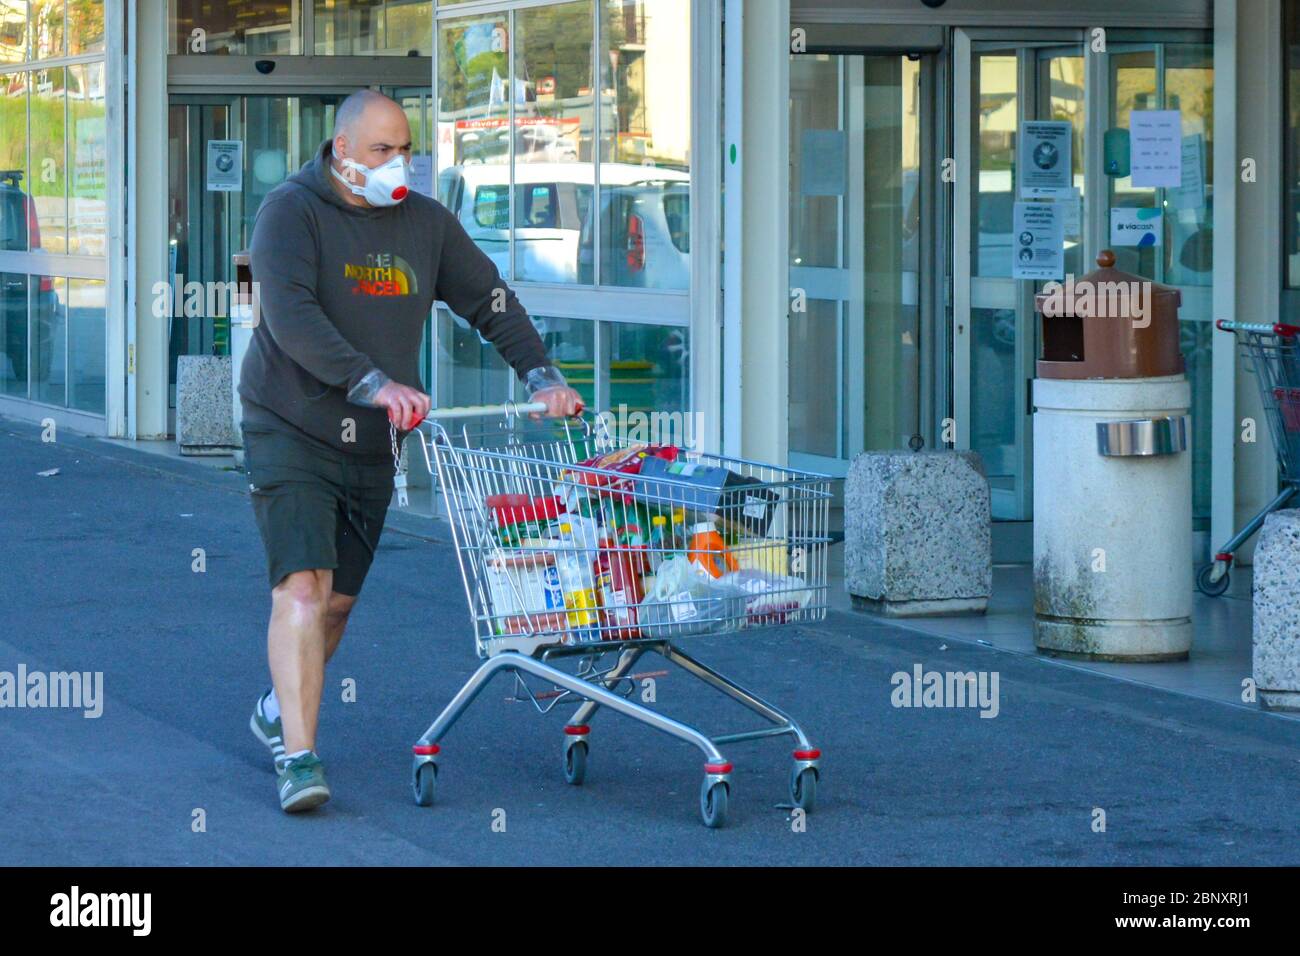 Closeup of a serious looking man with coronavirus protective mask pushing his shopping cart full of essentials. Routine scene outside grocery stores d Stock Photo